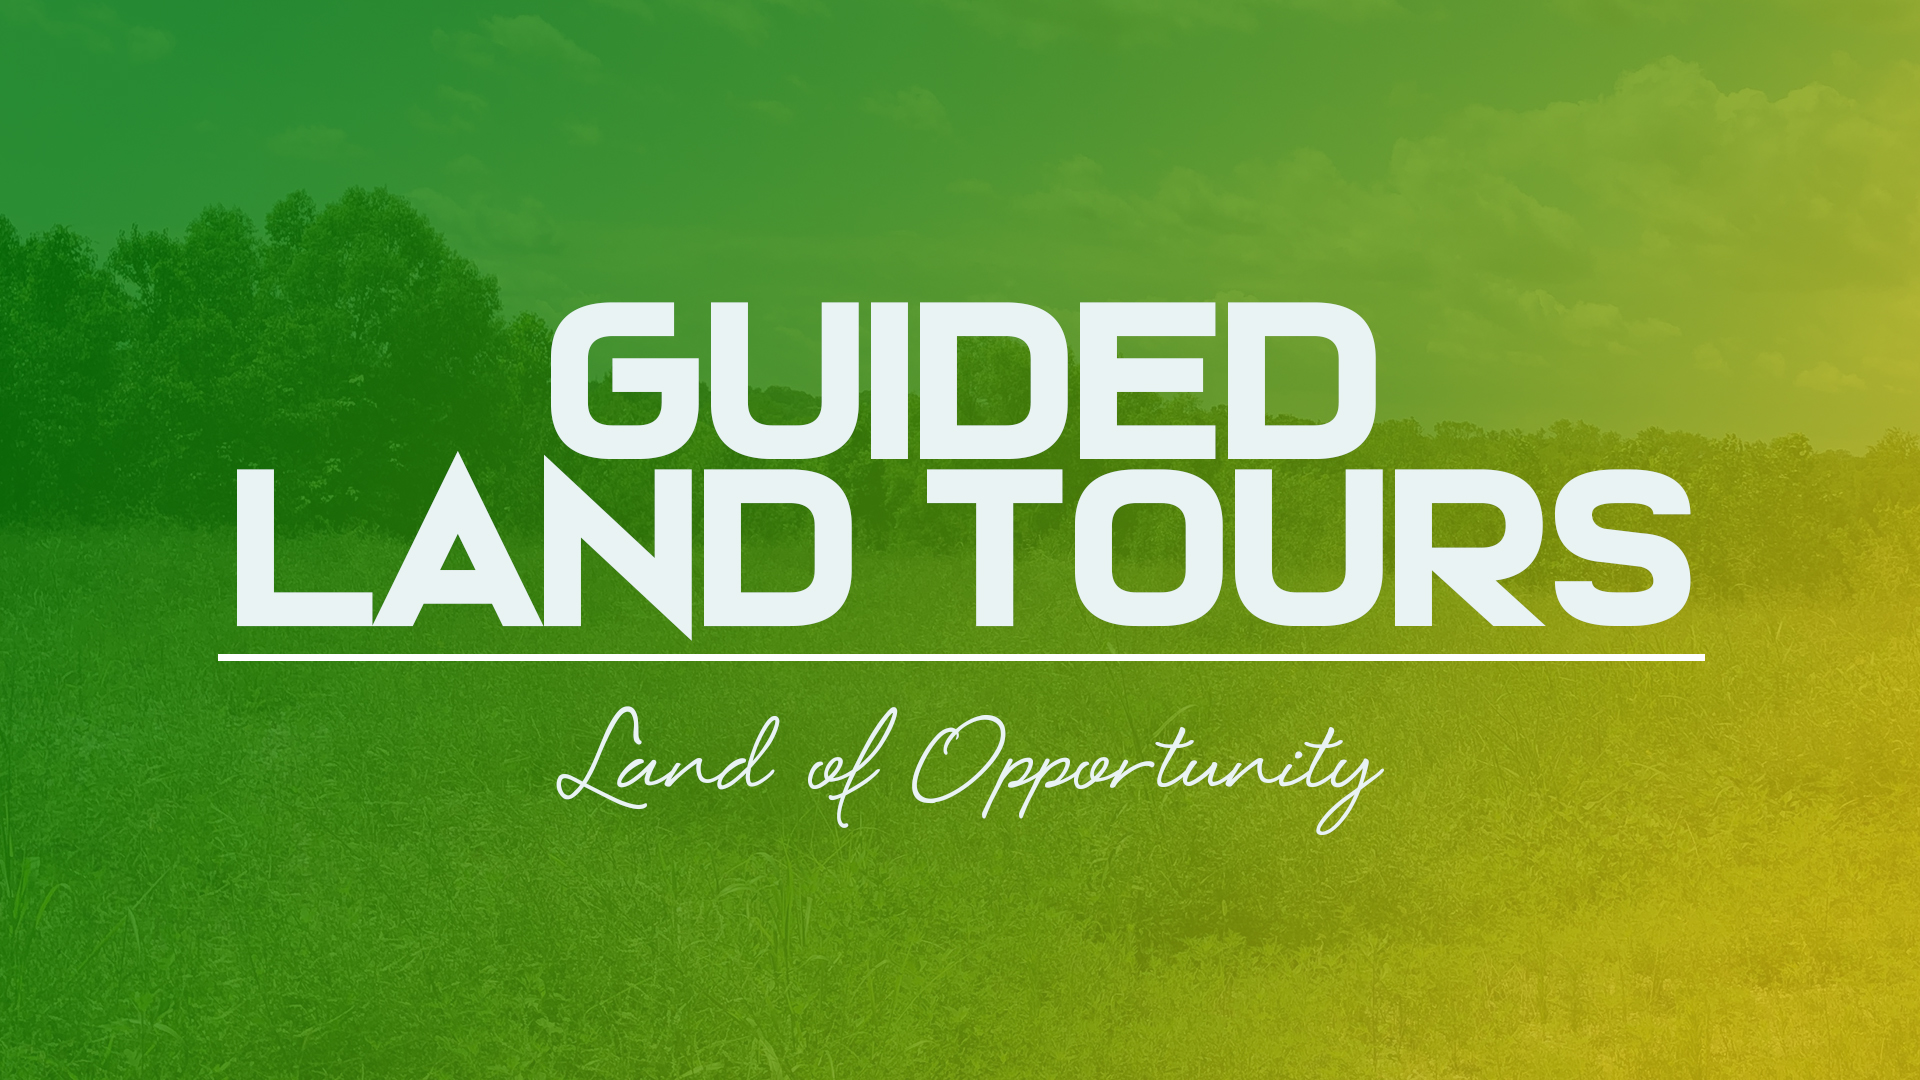 guided land tours image